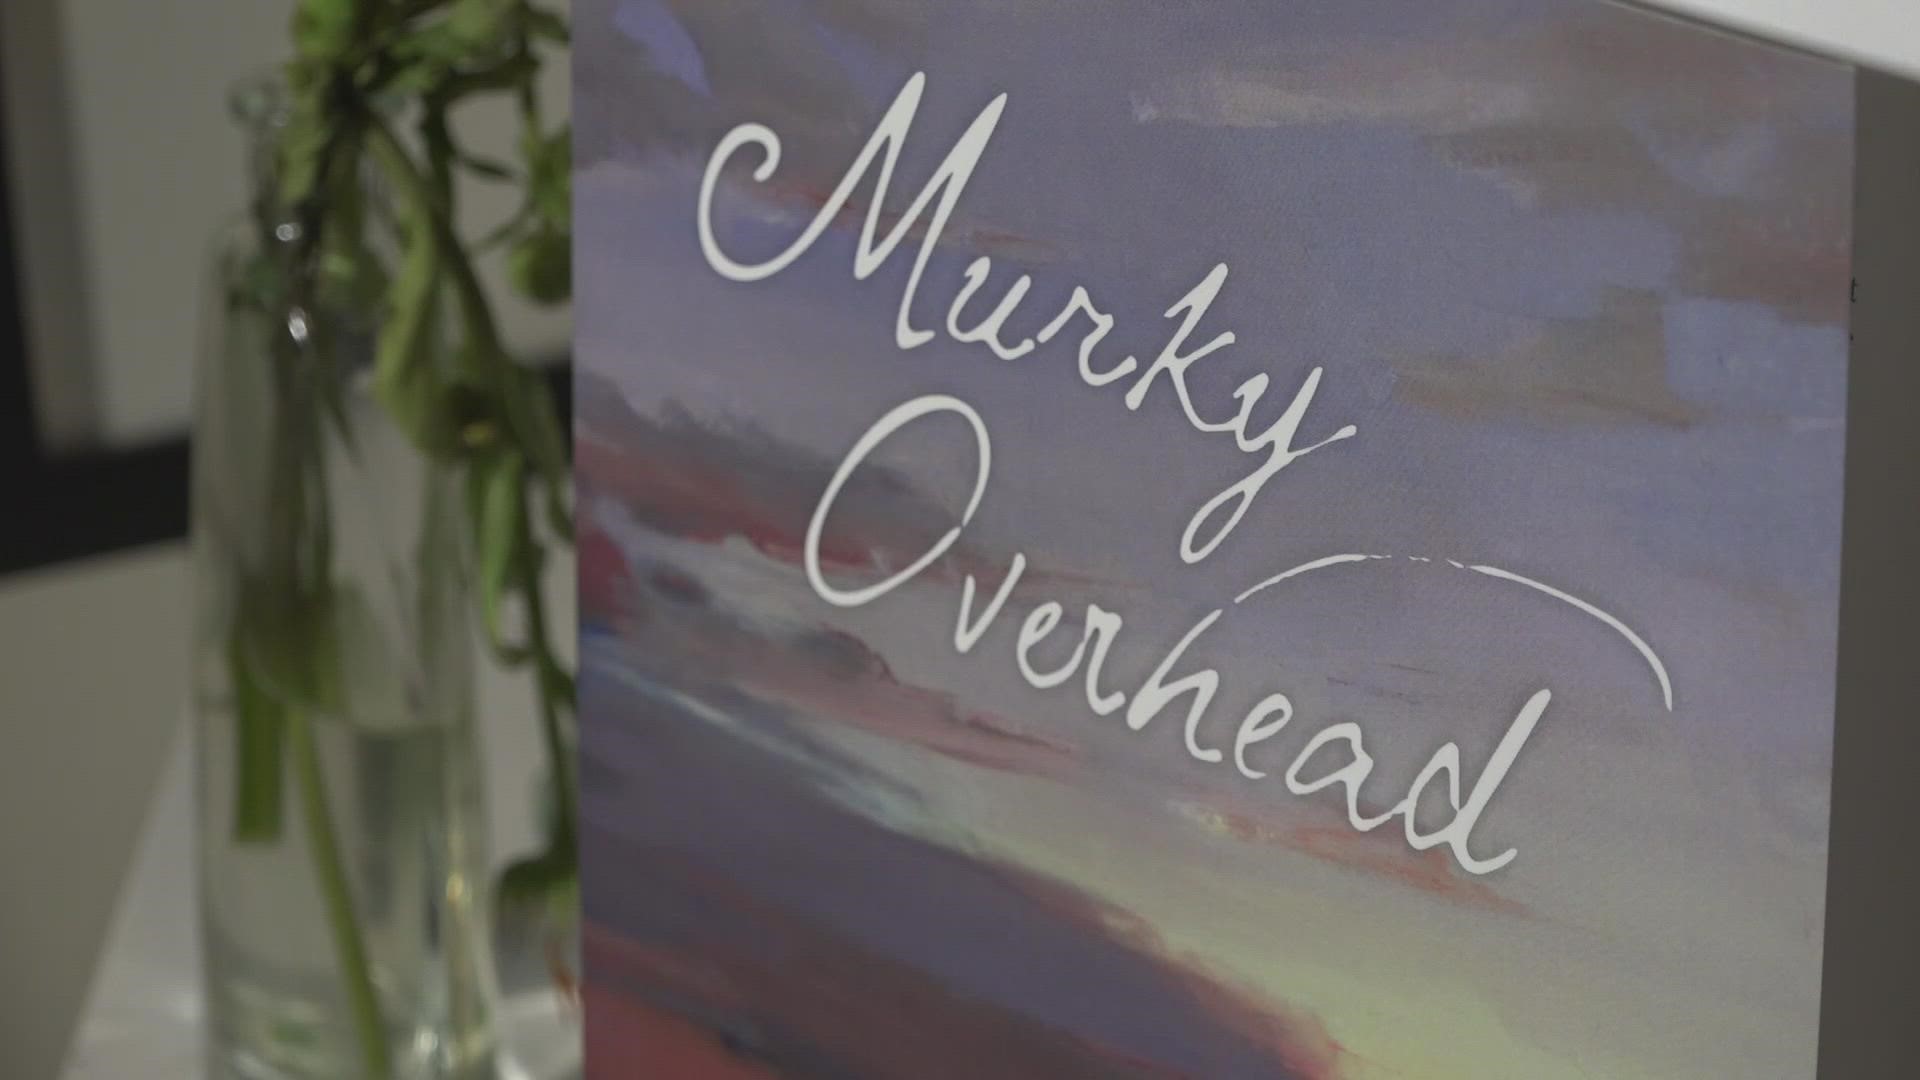 Retired professor, Michael Connolly, says he has been writing his first novel 'Murky Overhead' for his whole life.